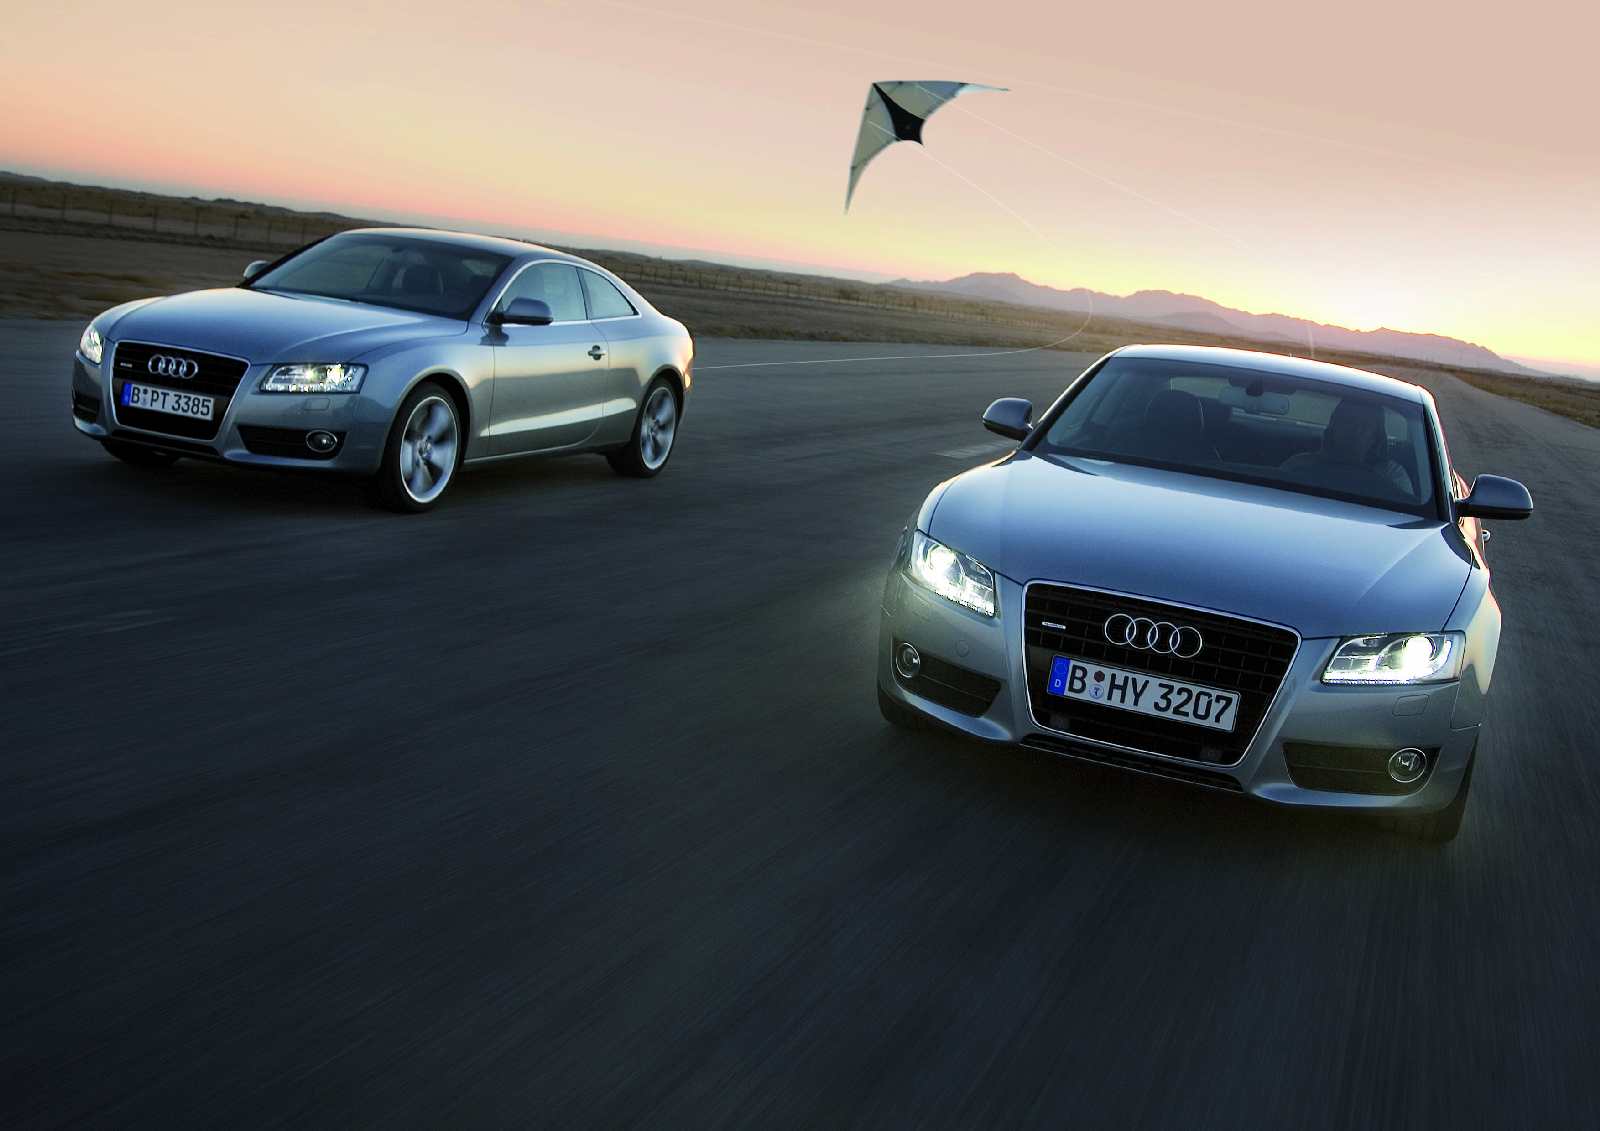 Audi A Kite wallpapers for your desk 4K pleasure